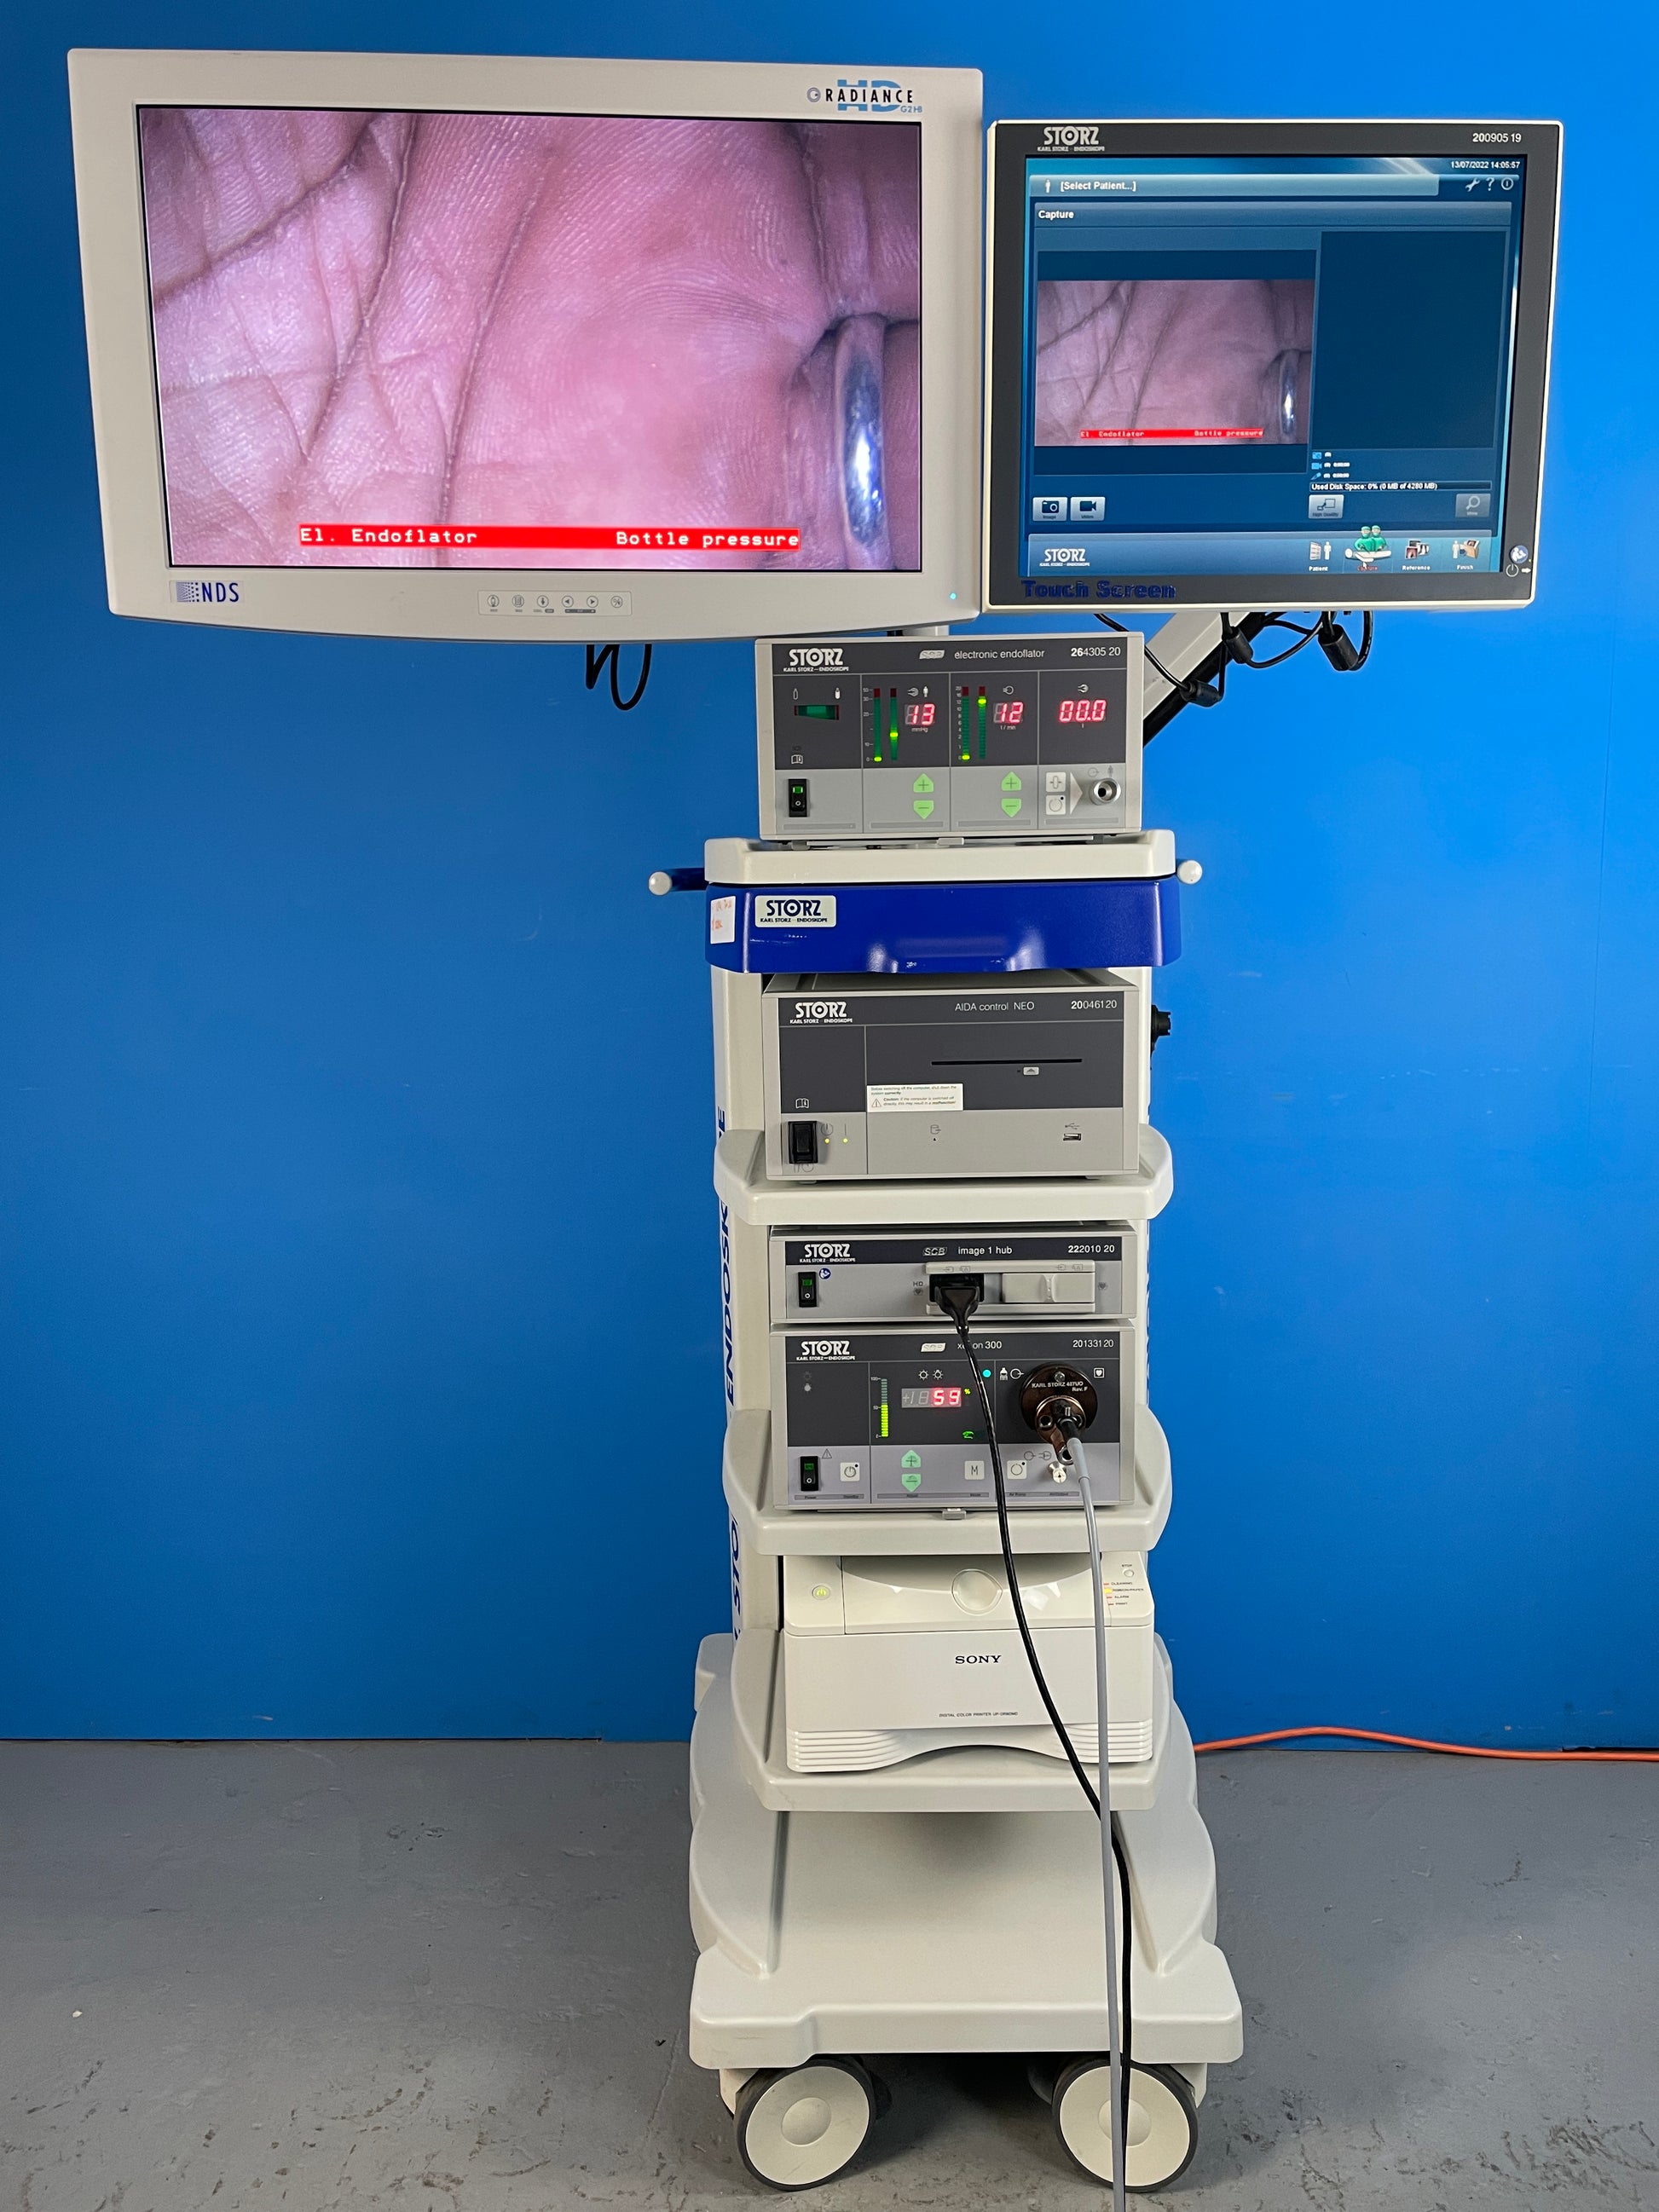 Karl Storz Image 1 Dual Channel with H3 Laproscopy System used for Laparoscopy Surgical Procedures.